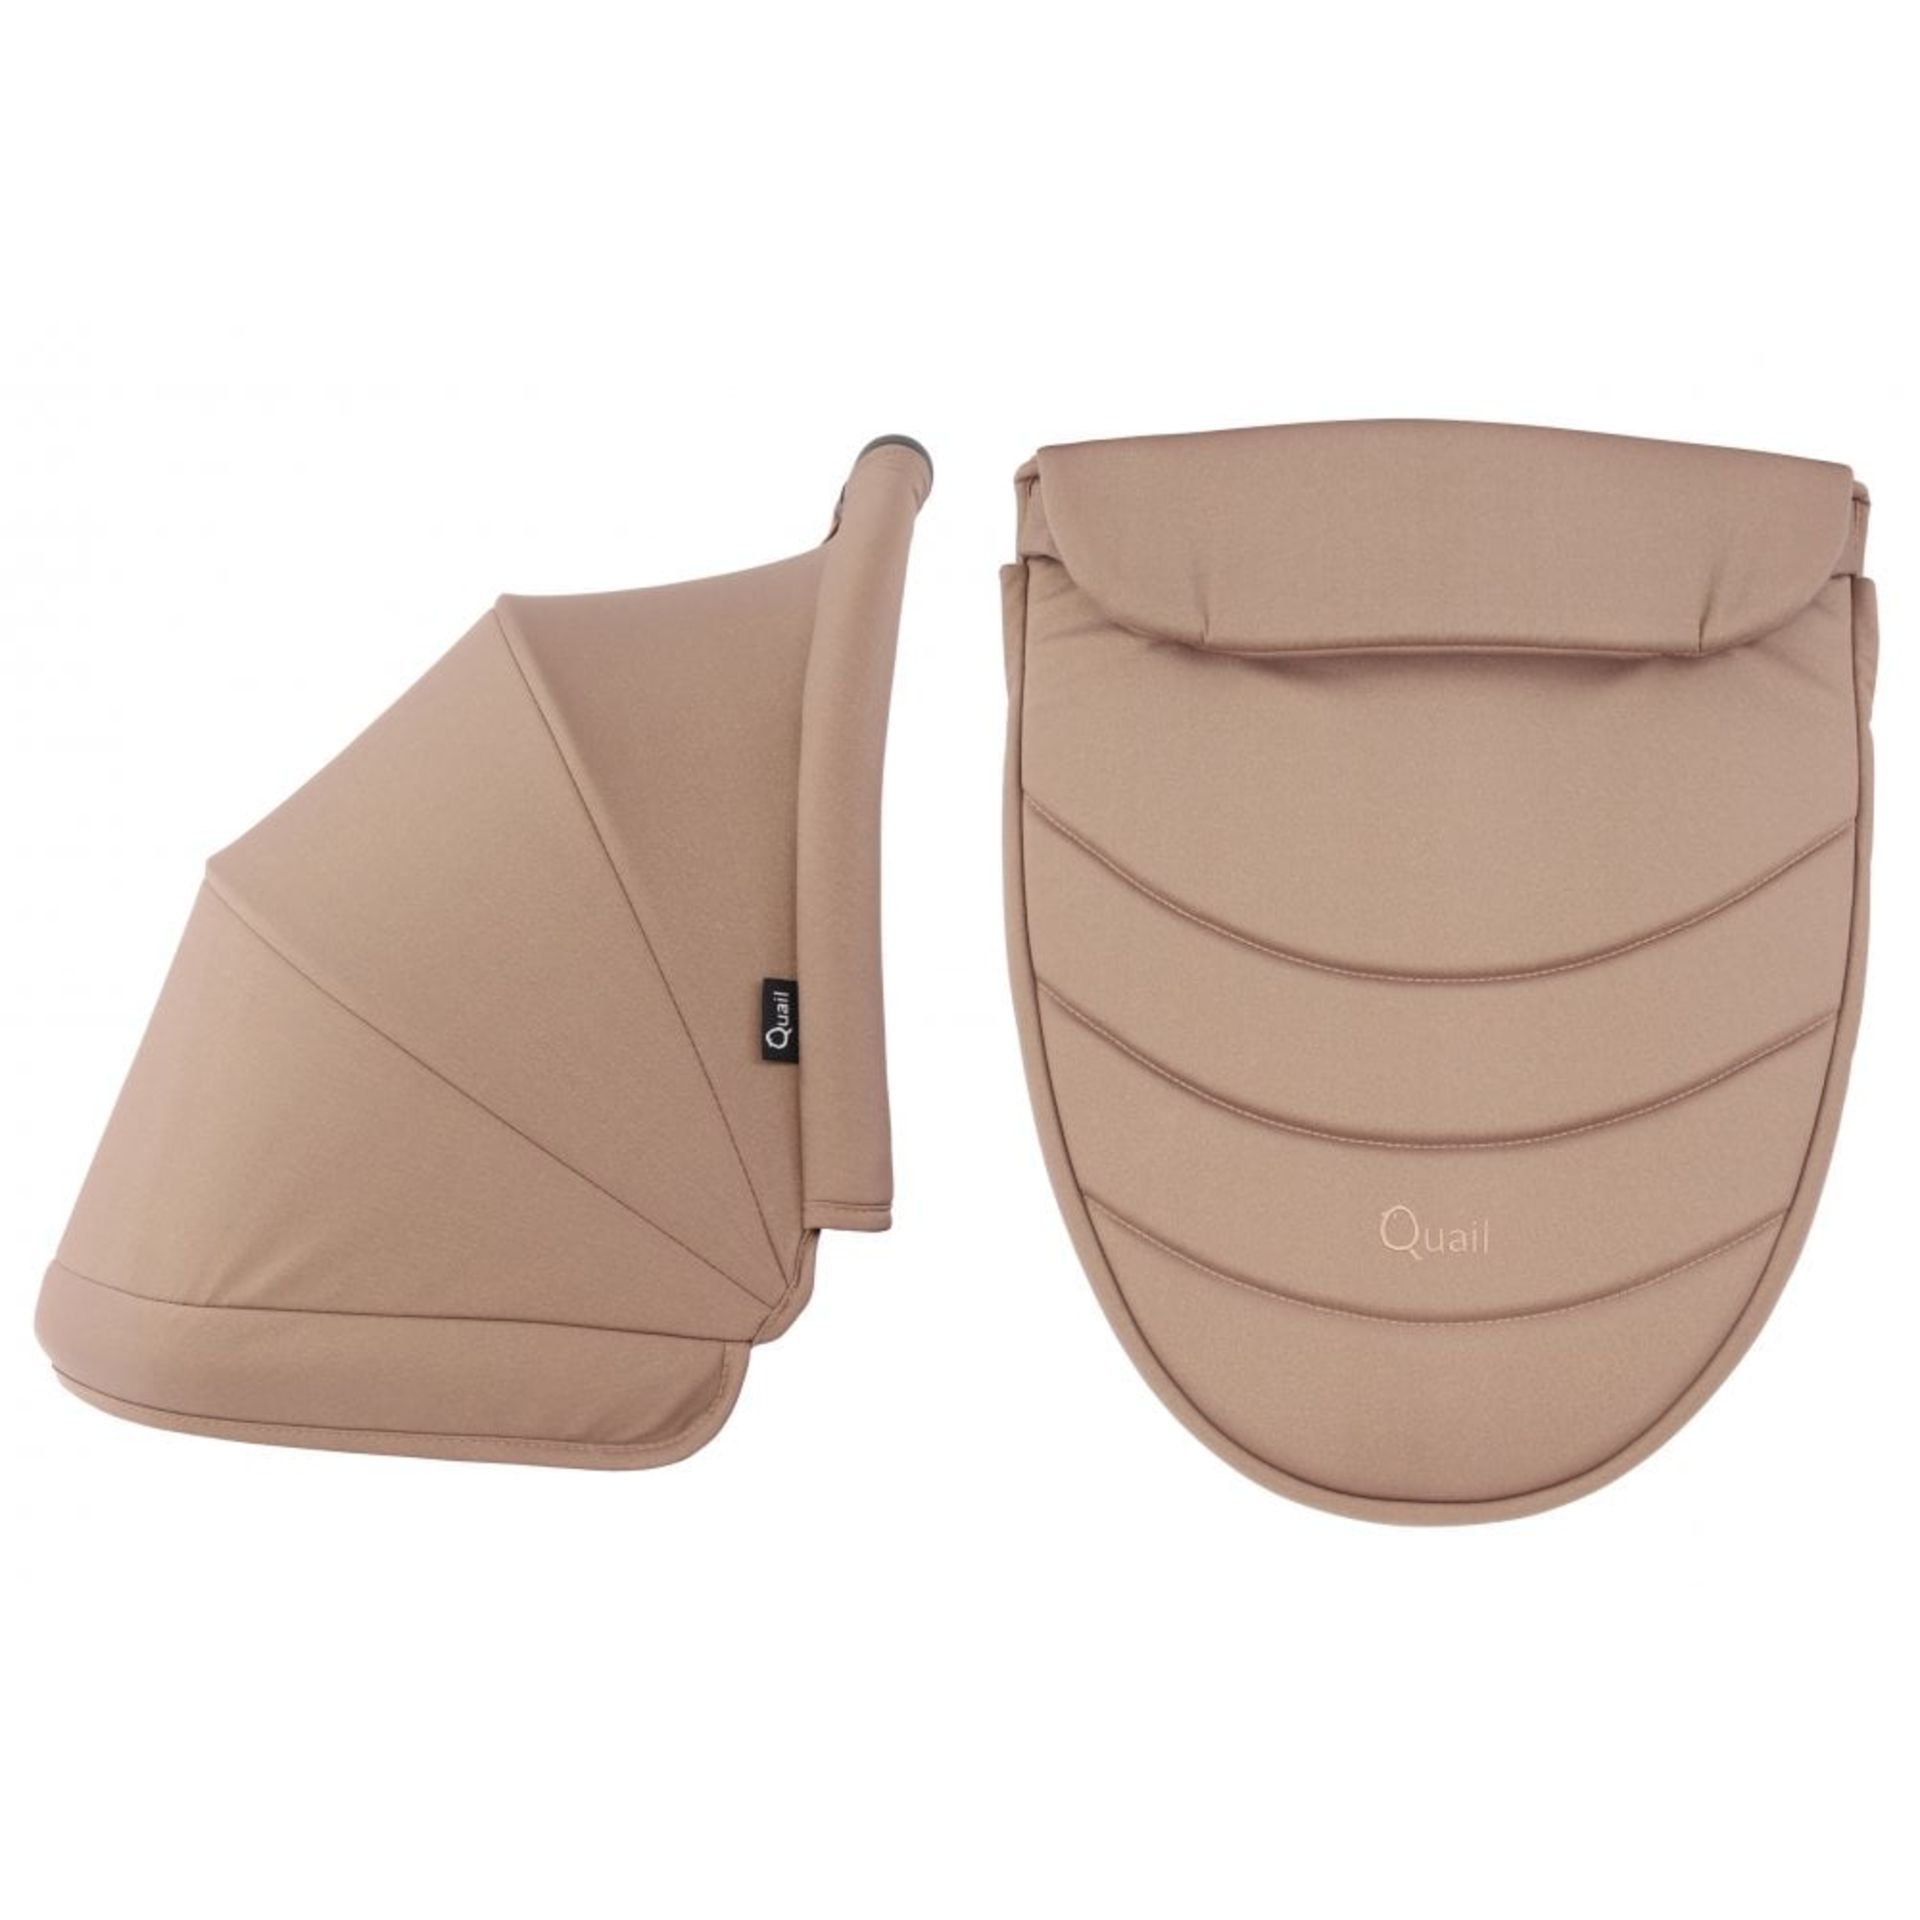 BNIB EGG QUAIL CARRYCOT COLOUR PACK IN LATTE RRP£45(STOCK IMAGE FOR REFERENCE ONLY-SEE OTHER PICS